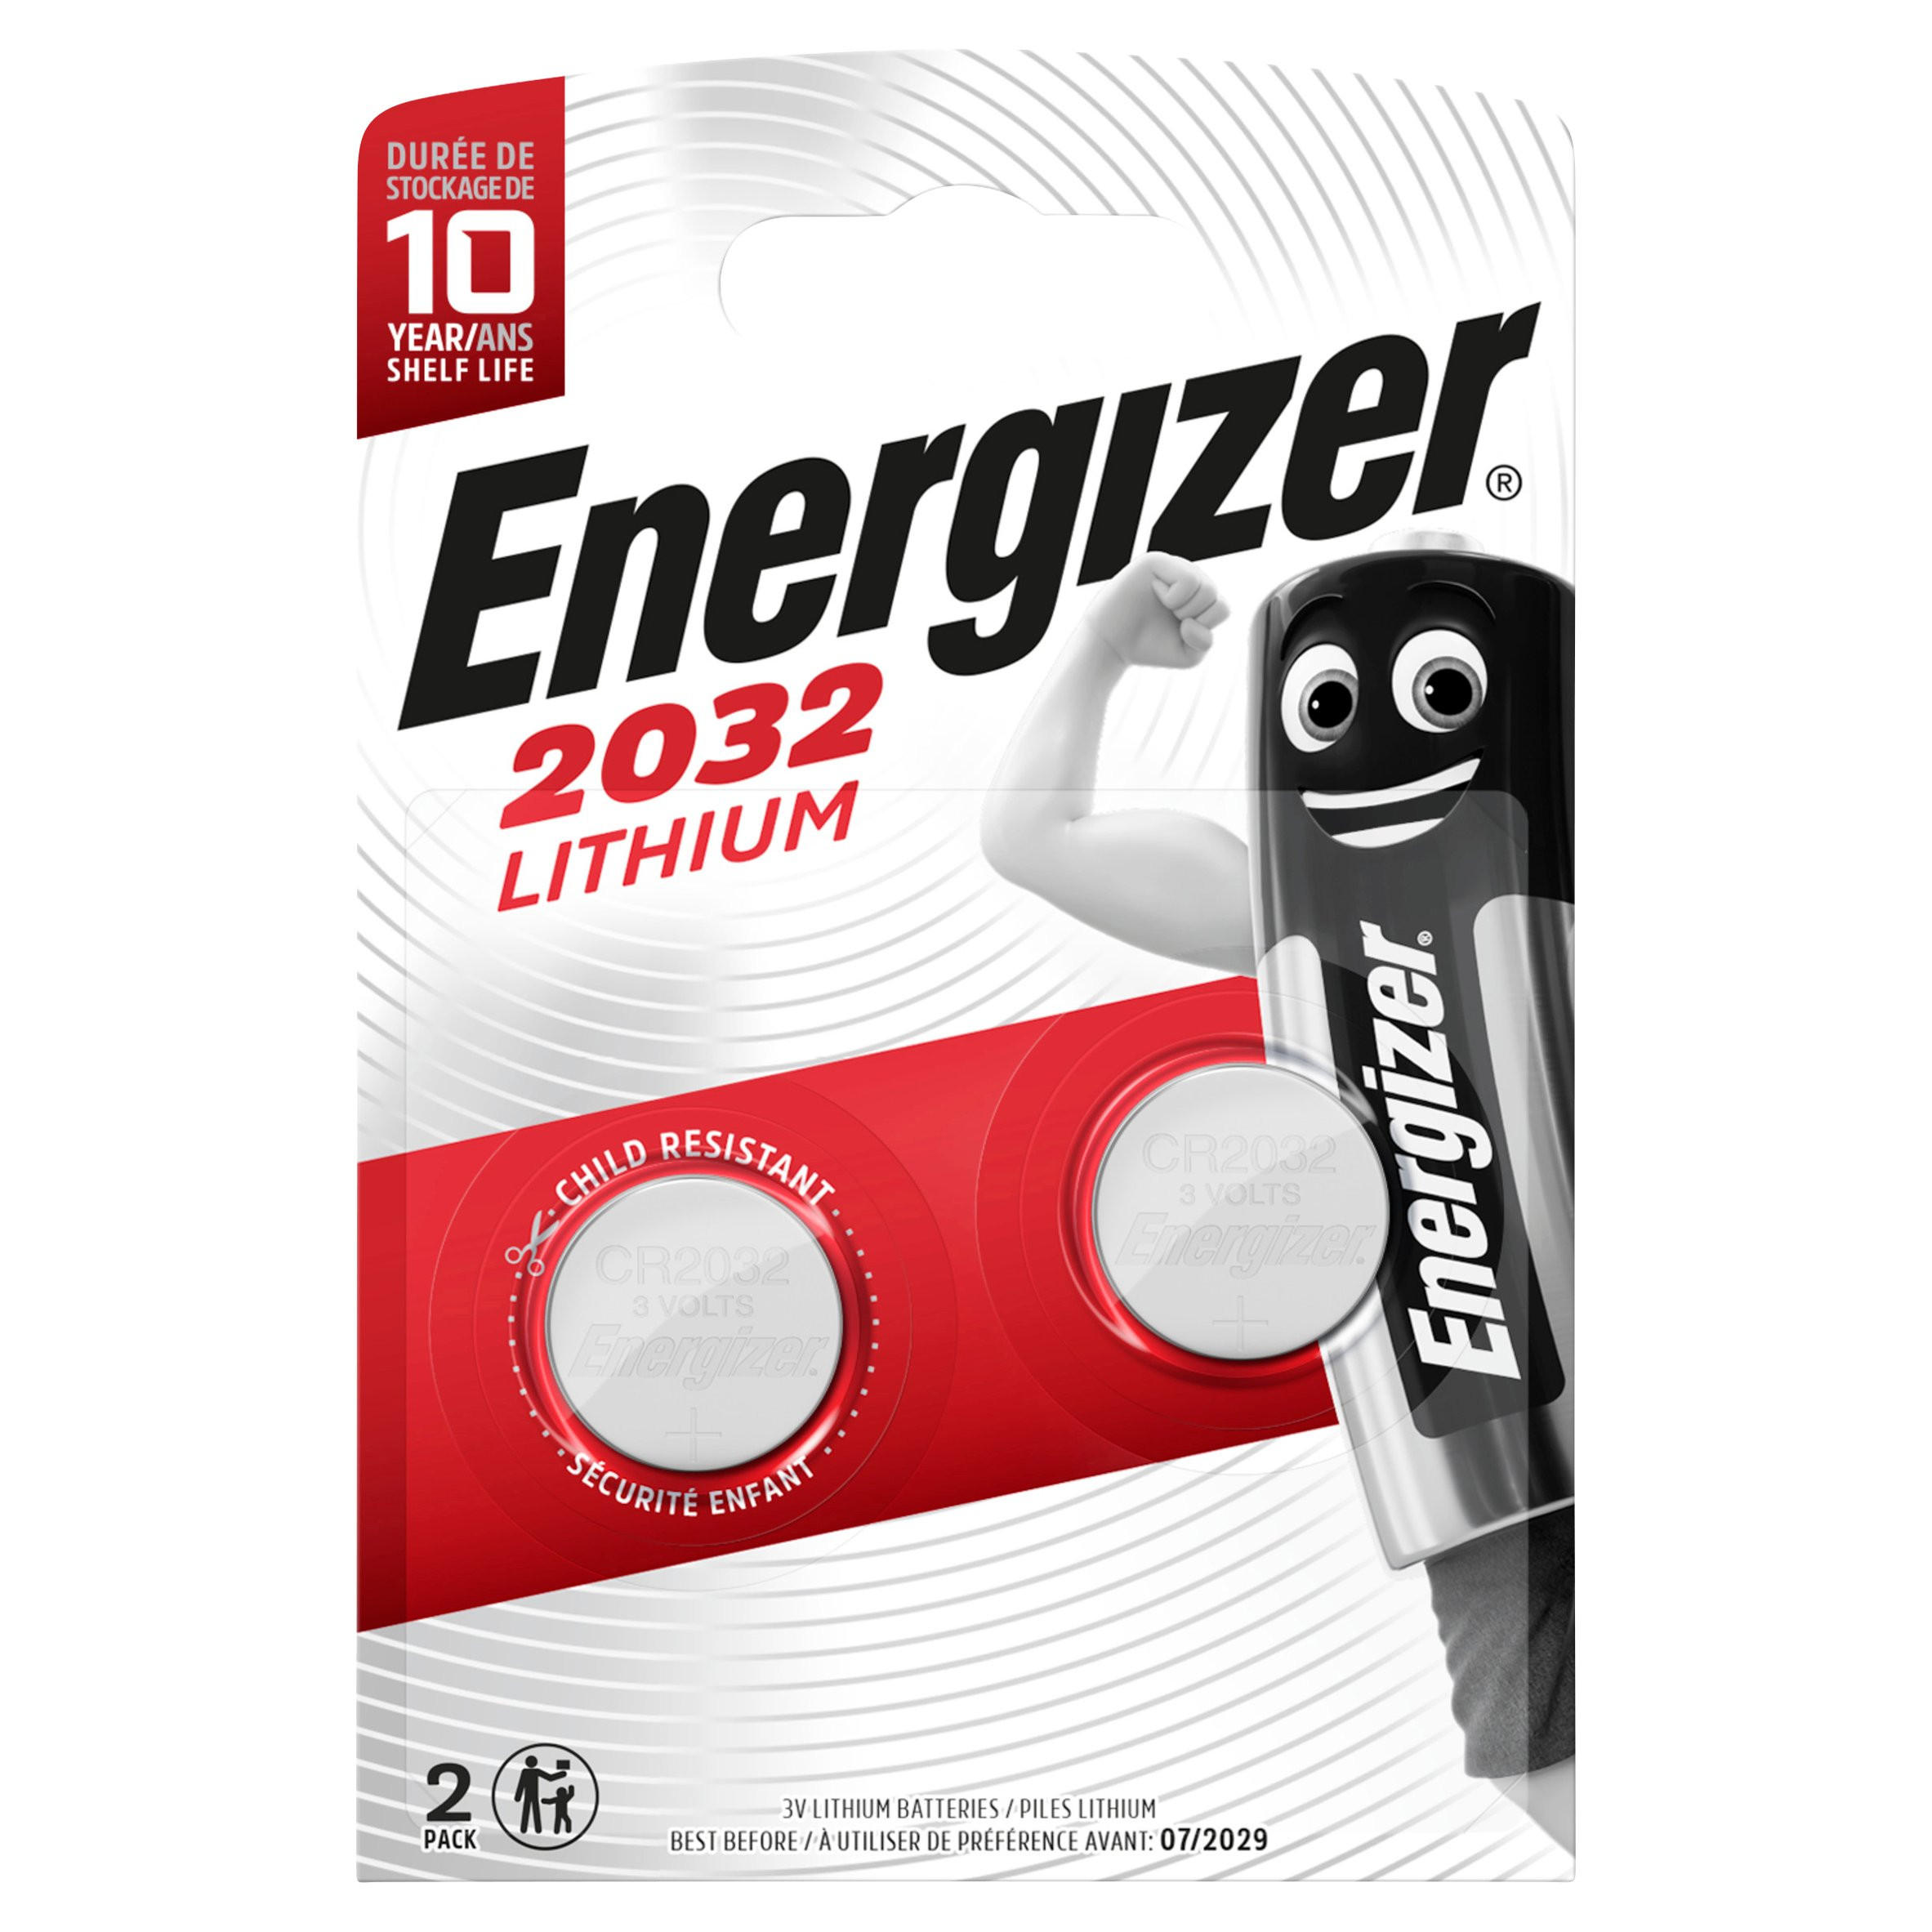 energizer-2032-lithium-coin-battery-2-pack-home-accessories-iceland